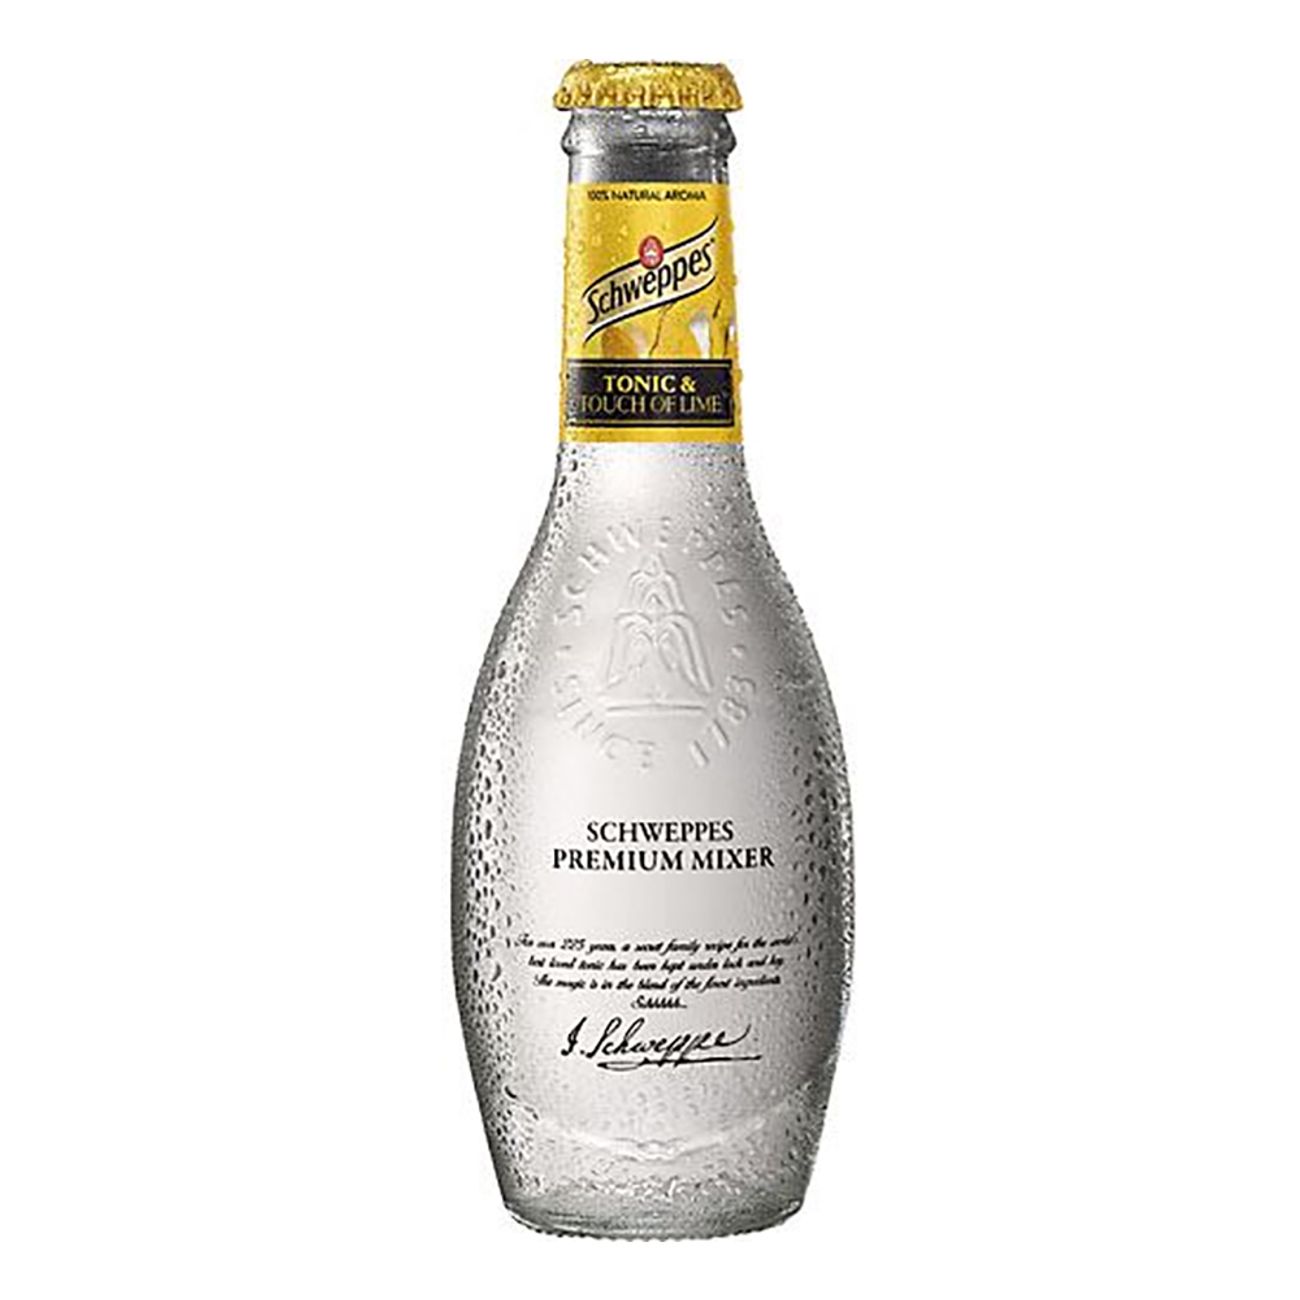 schweppes-mix-toniclime-78626-1